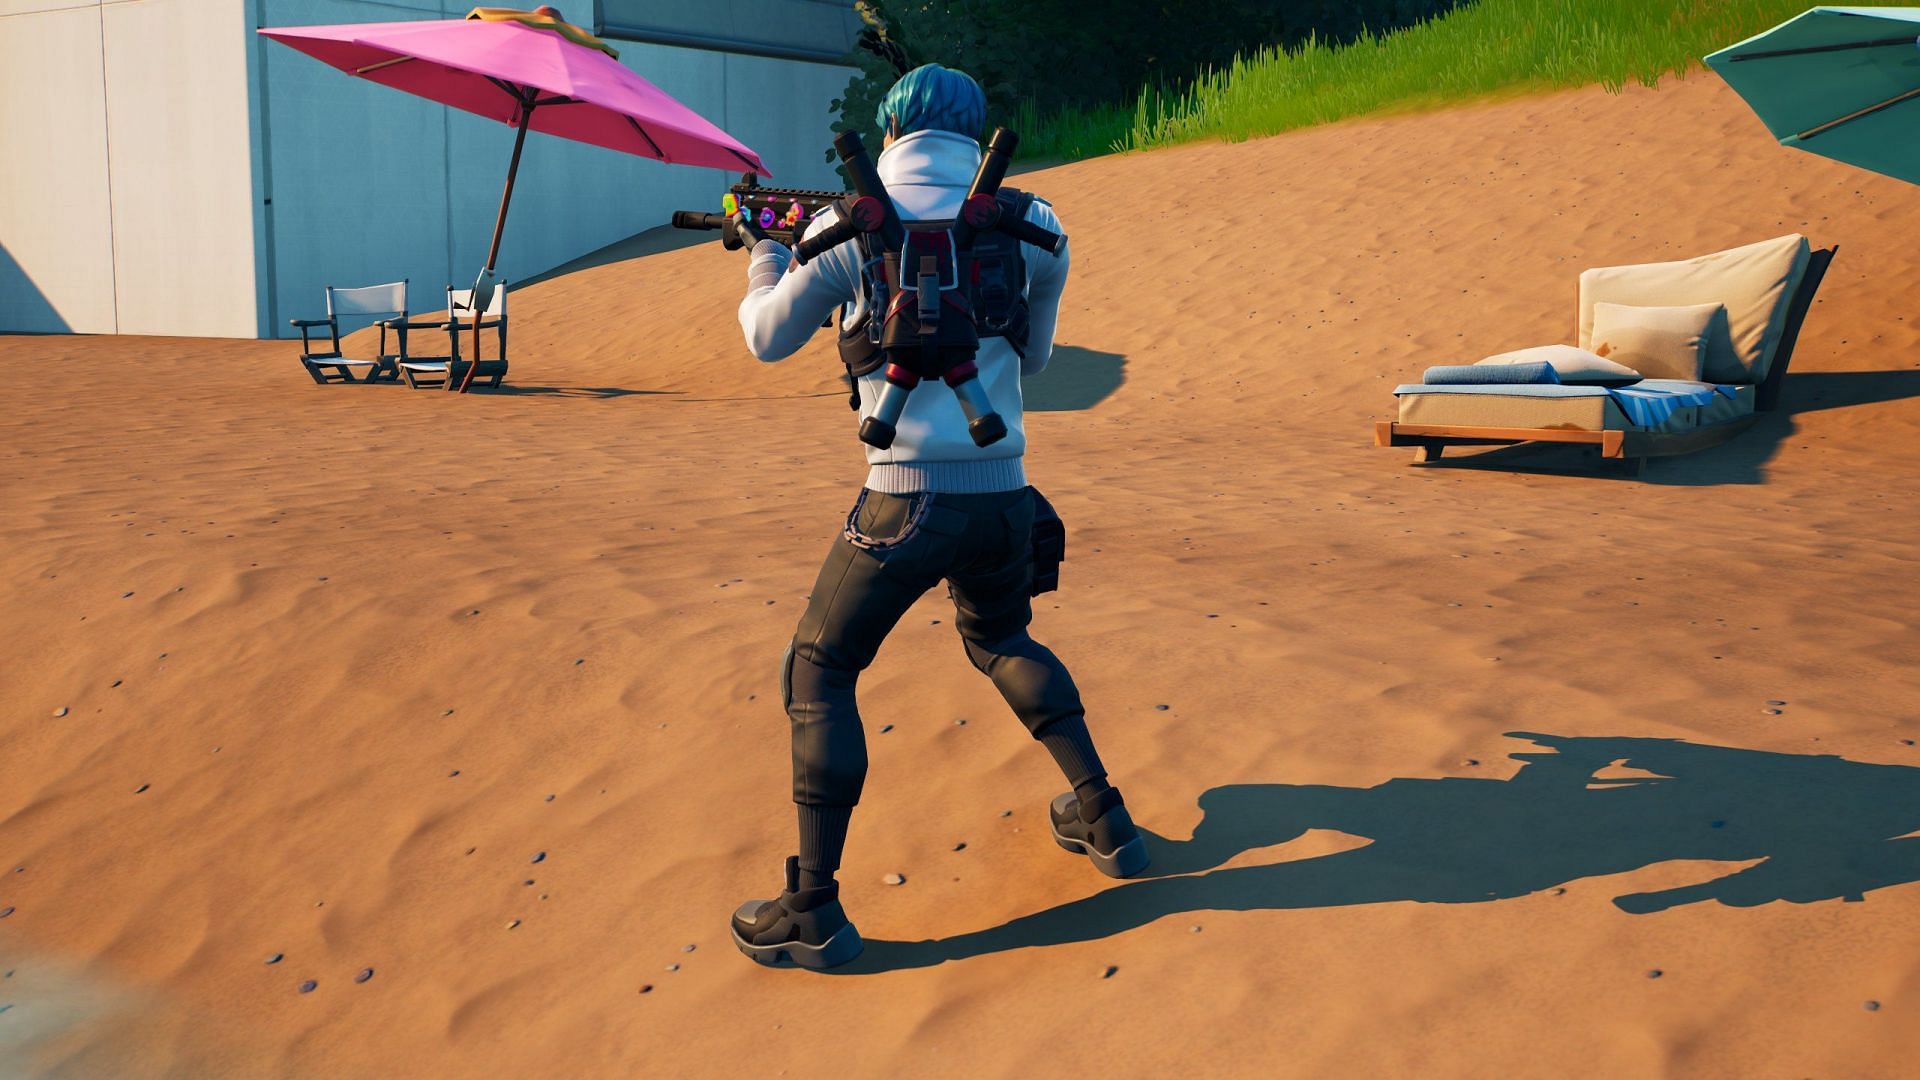 Jun-Hwan is the free PlayStation Plus skin that will soon be released to Fortnite (Image via Epic Games)